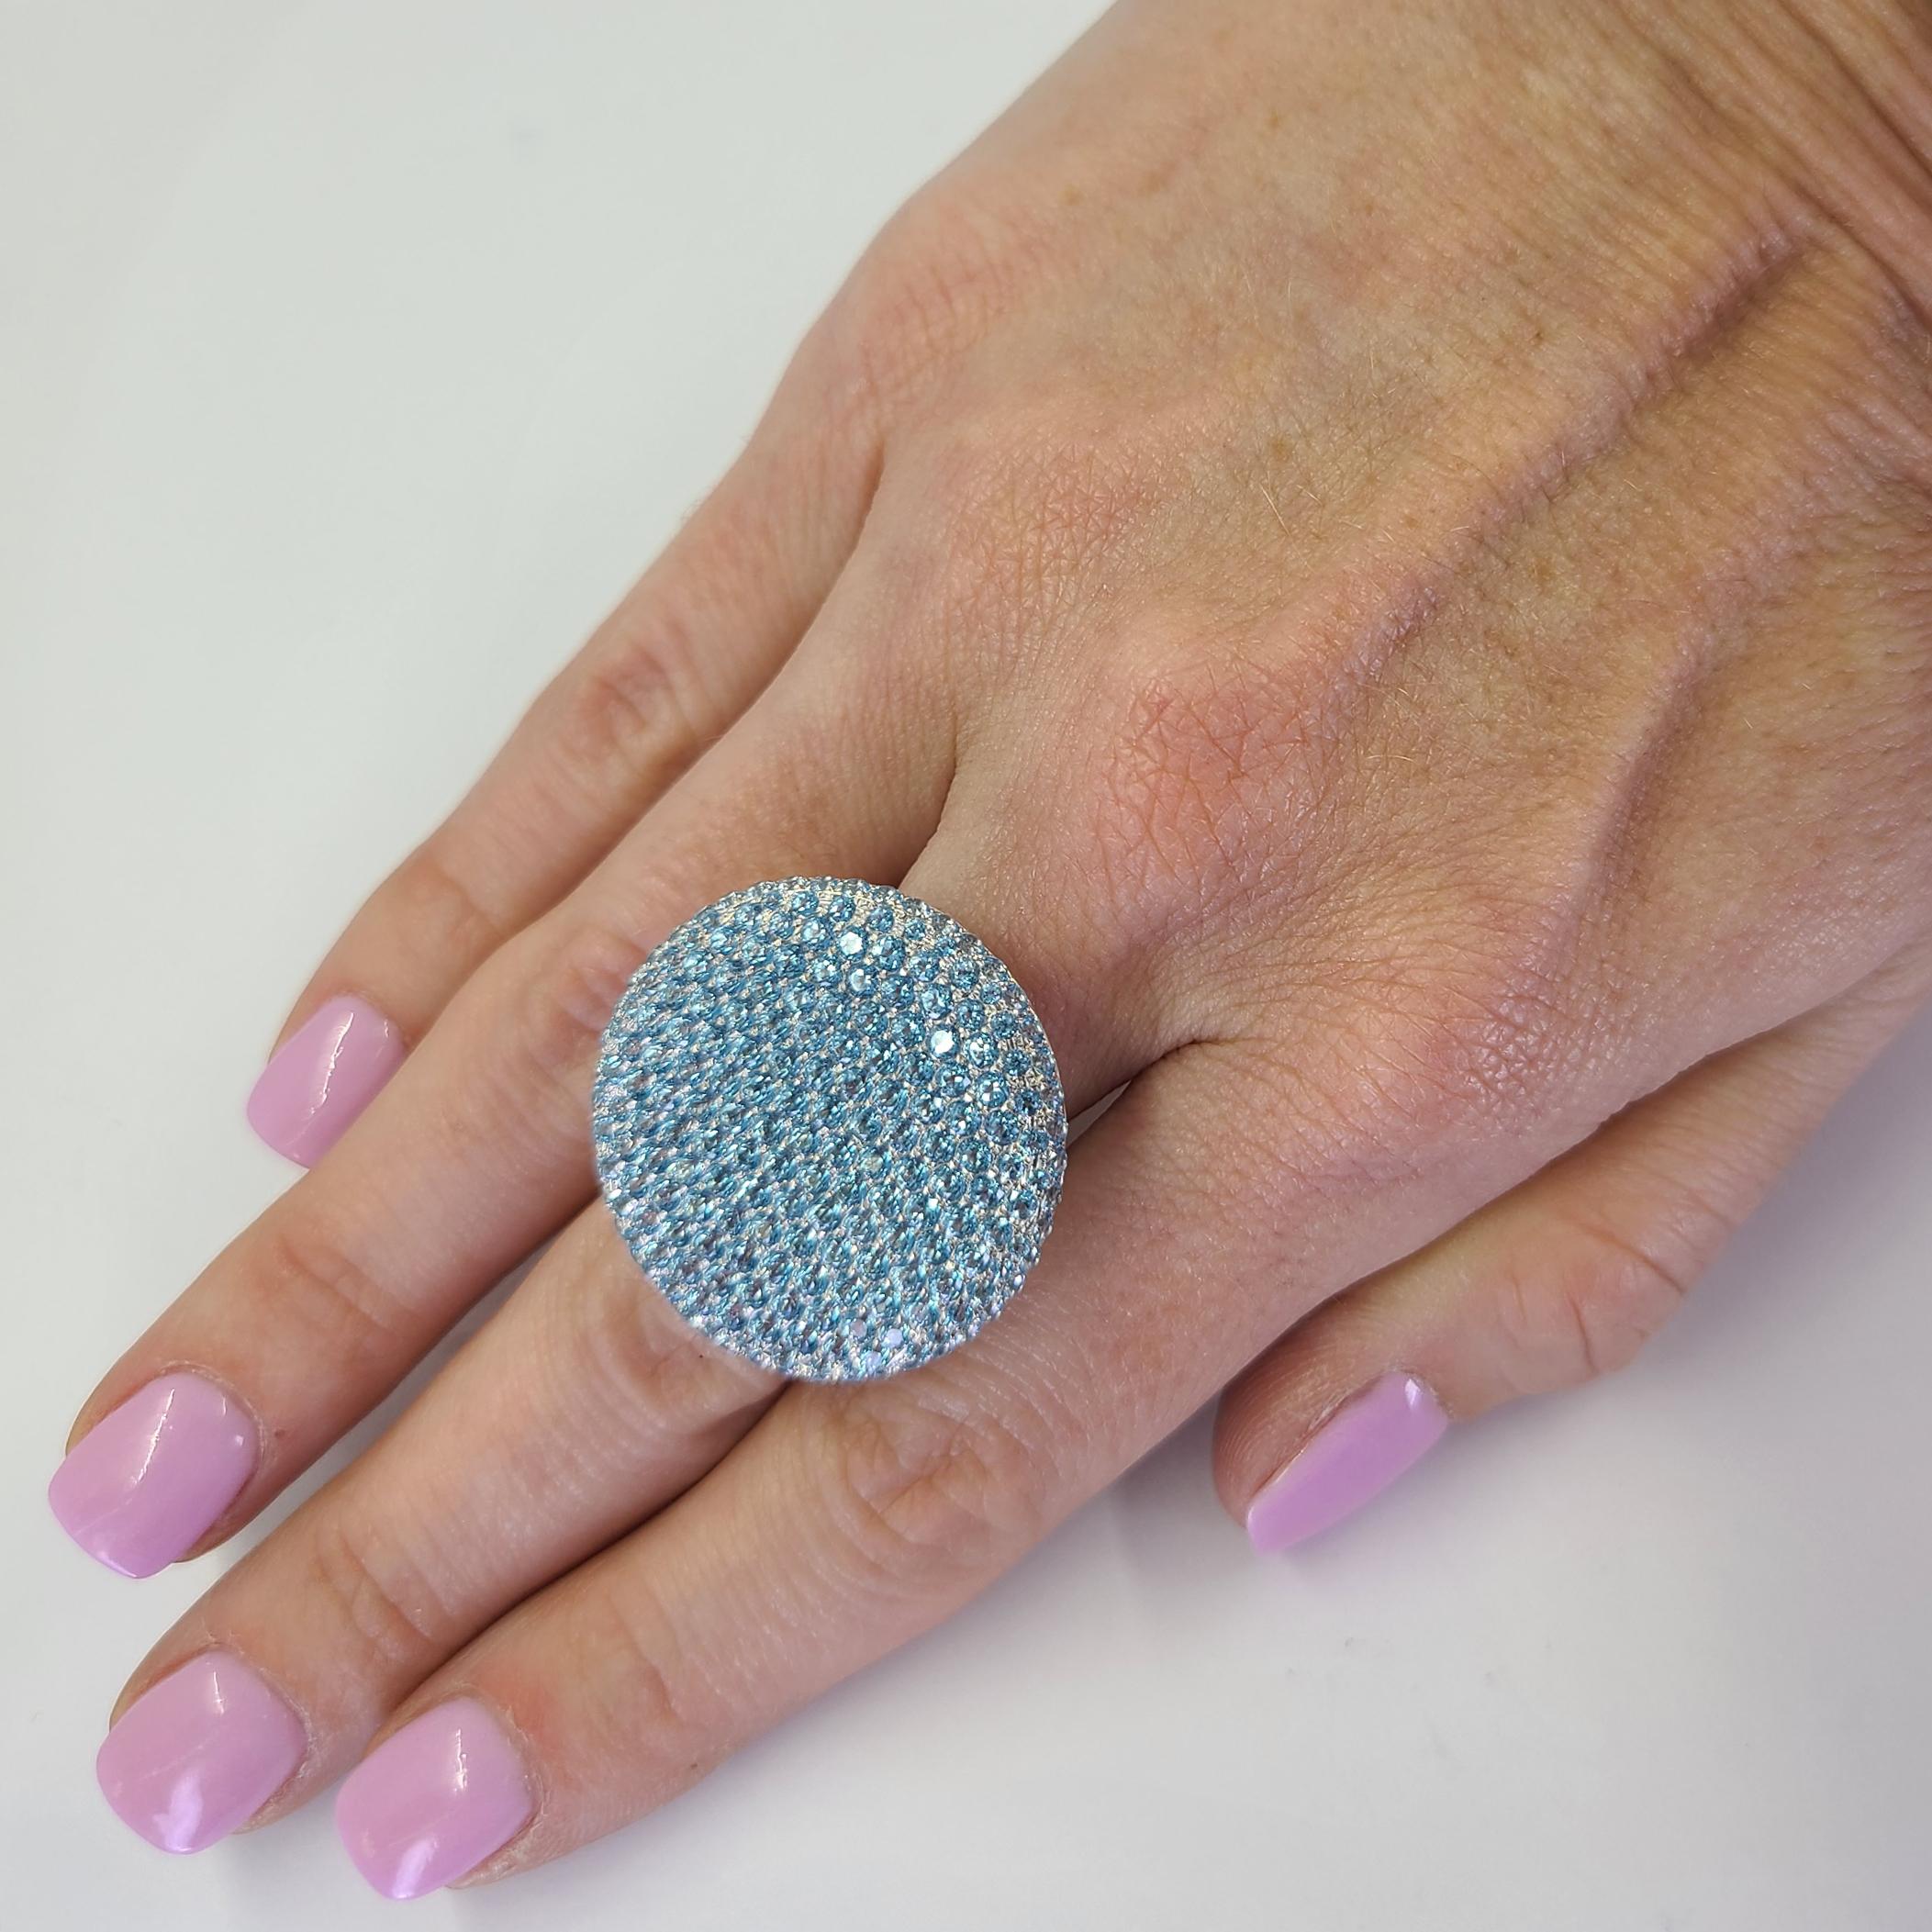 18 Karat White Gold Pave Disc Ring Featuring Approximately 5 Carats of Round Blue Topaz. Finger Size 9; Purchase Includes One Sizing Service. Finished Weight Is 14.2 Grams.